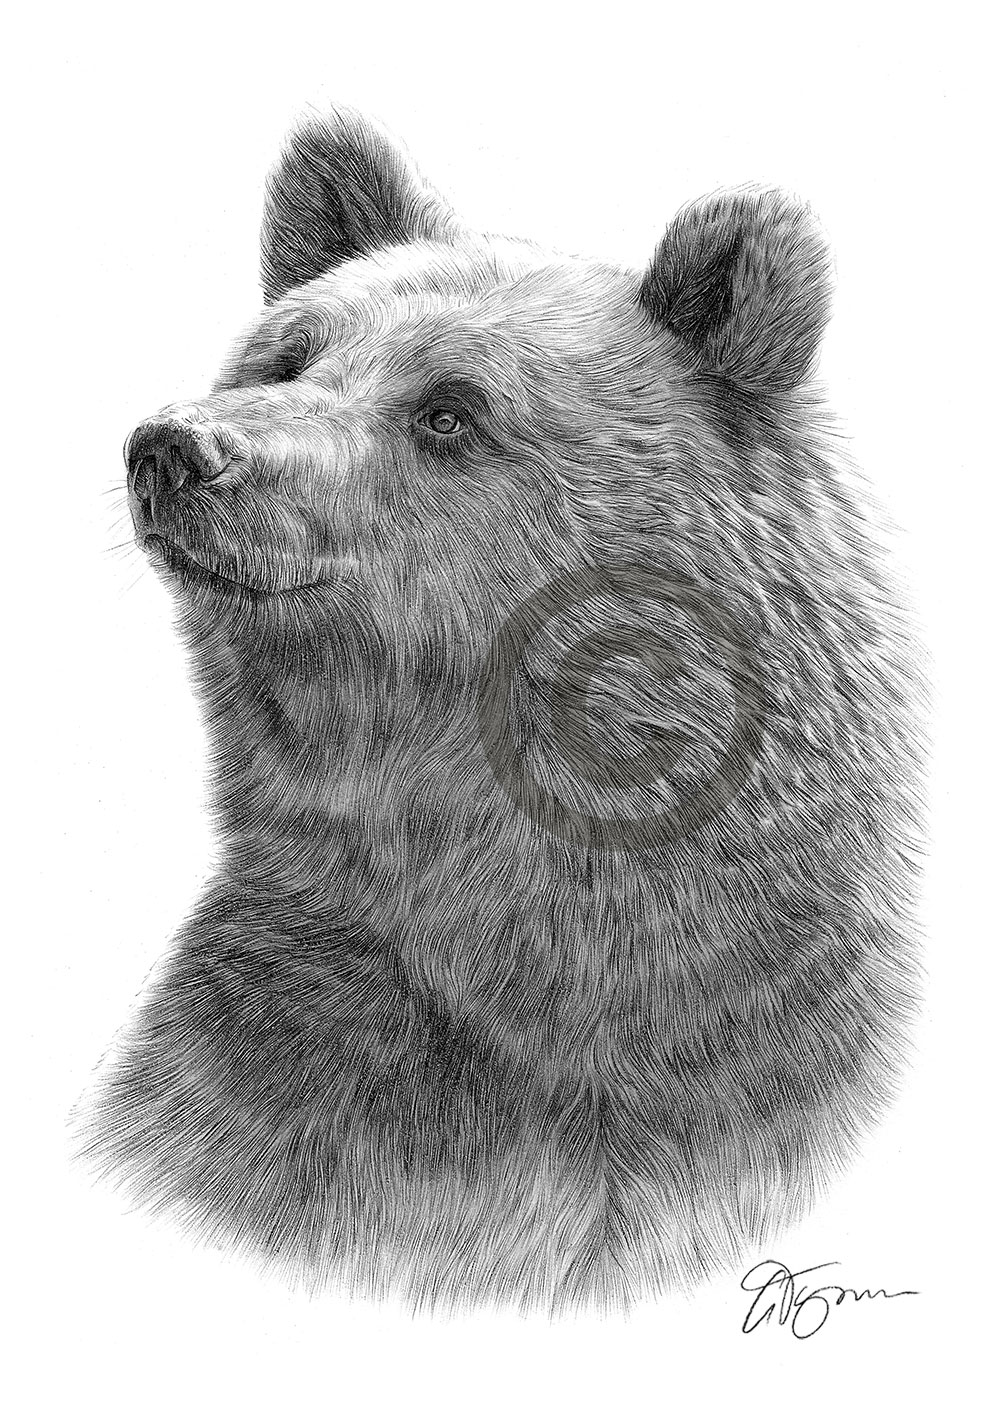 Pencil drawing of a grizzly bear by artist Gary Tymon